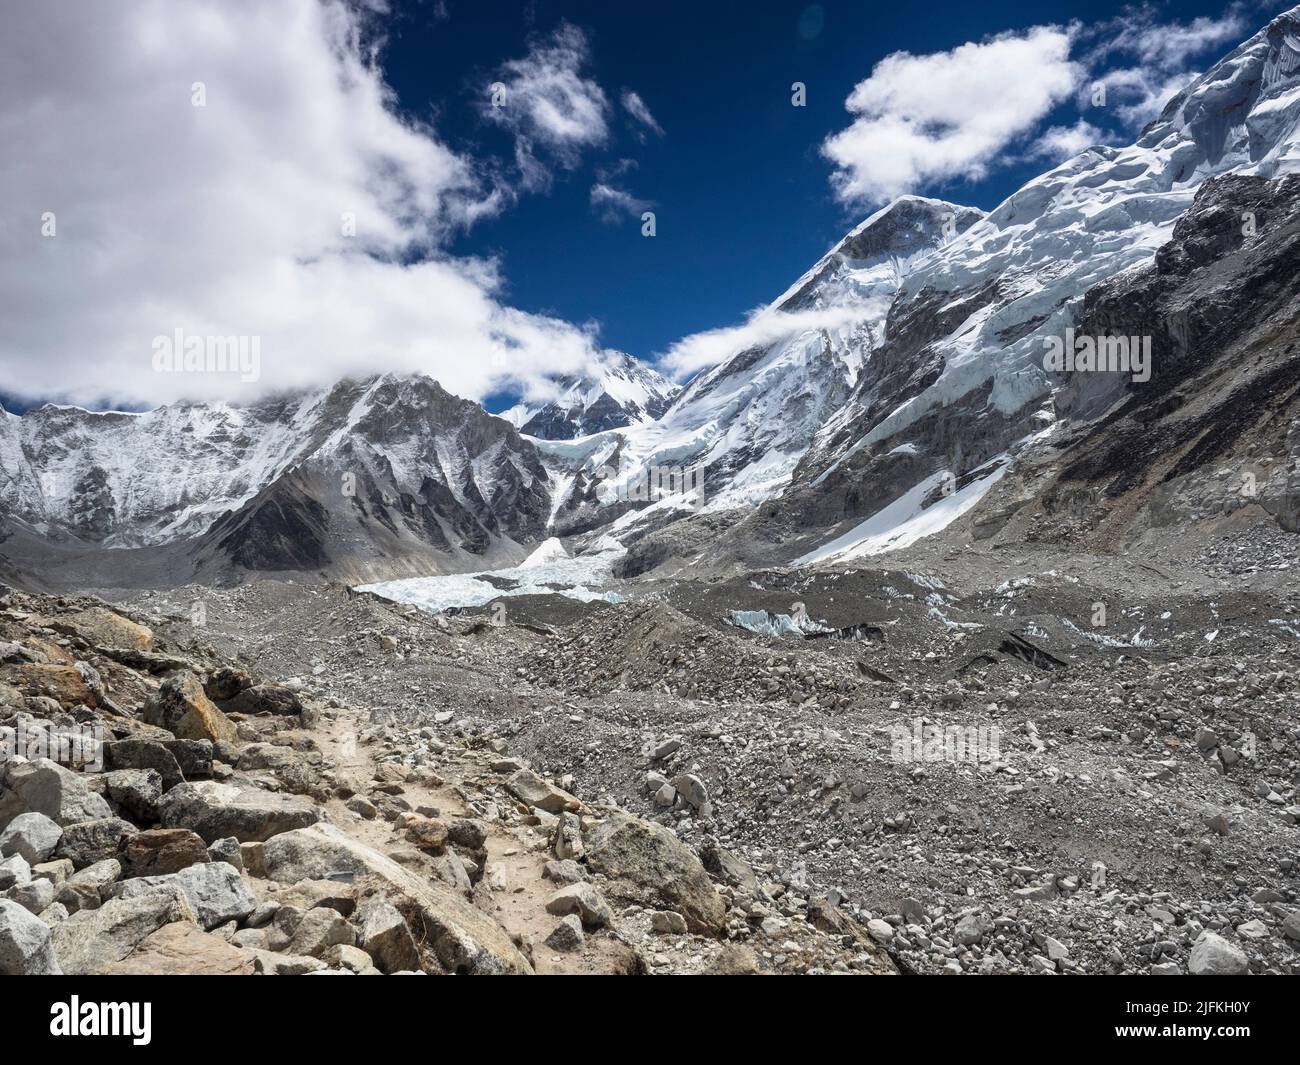 The trekking route to Everest Base Camp along the Khumbu Glacier moraine. Base Camp is below Khumbutse at the left edge of the white Khumbu Icefall. Stock Photo